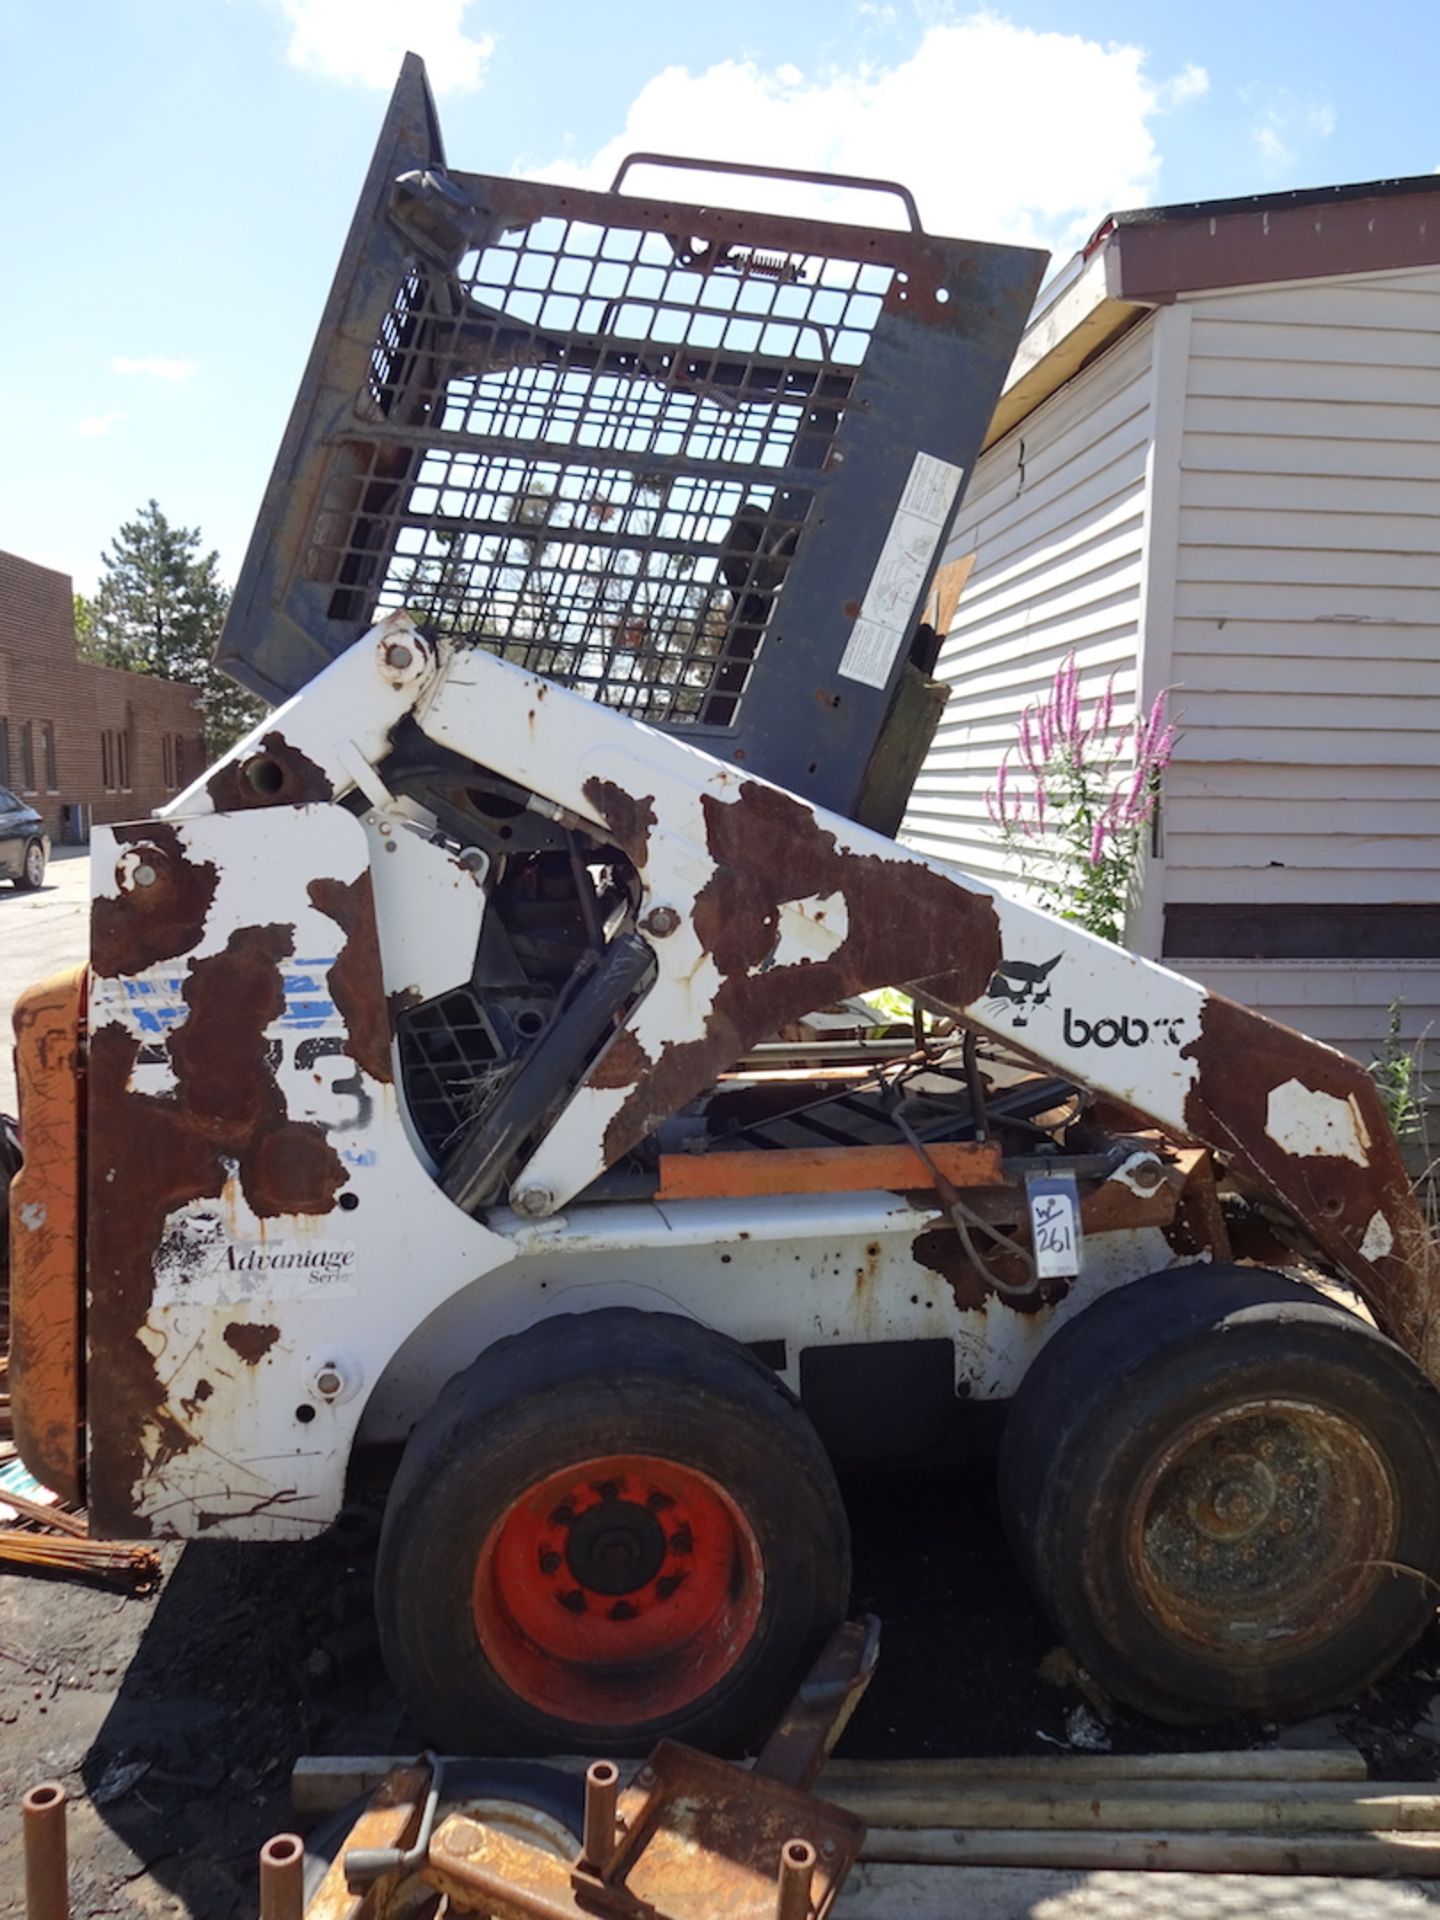 BOBCAT MODEL 773, FOAM TIRES, NO BUCKET, S/N: 509650795 AS IS, CONDITION UNKNOWN, PLEASE PLAN ON - Image 2 of 2